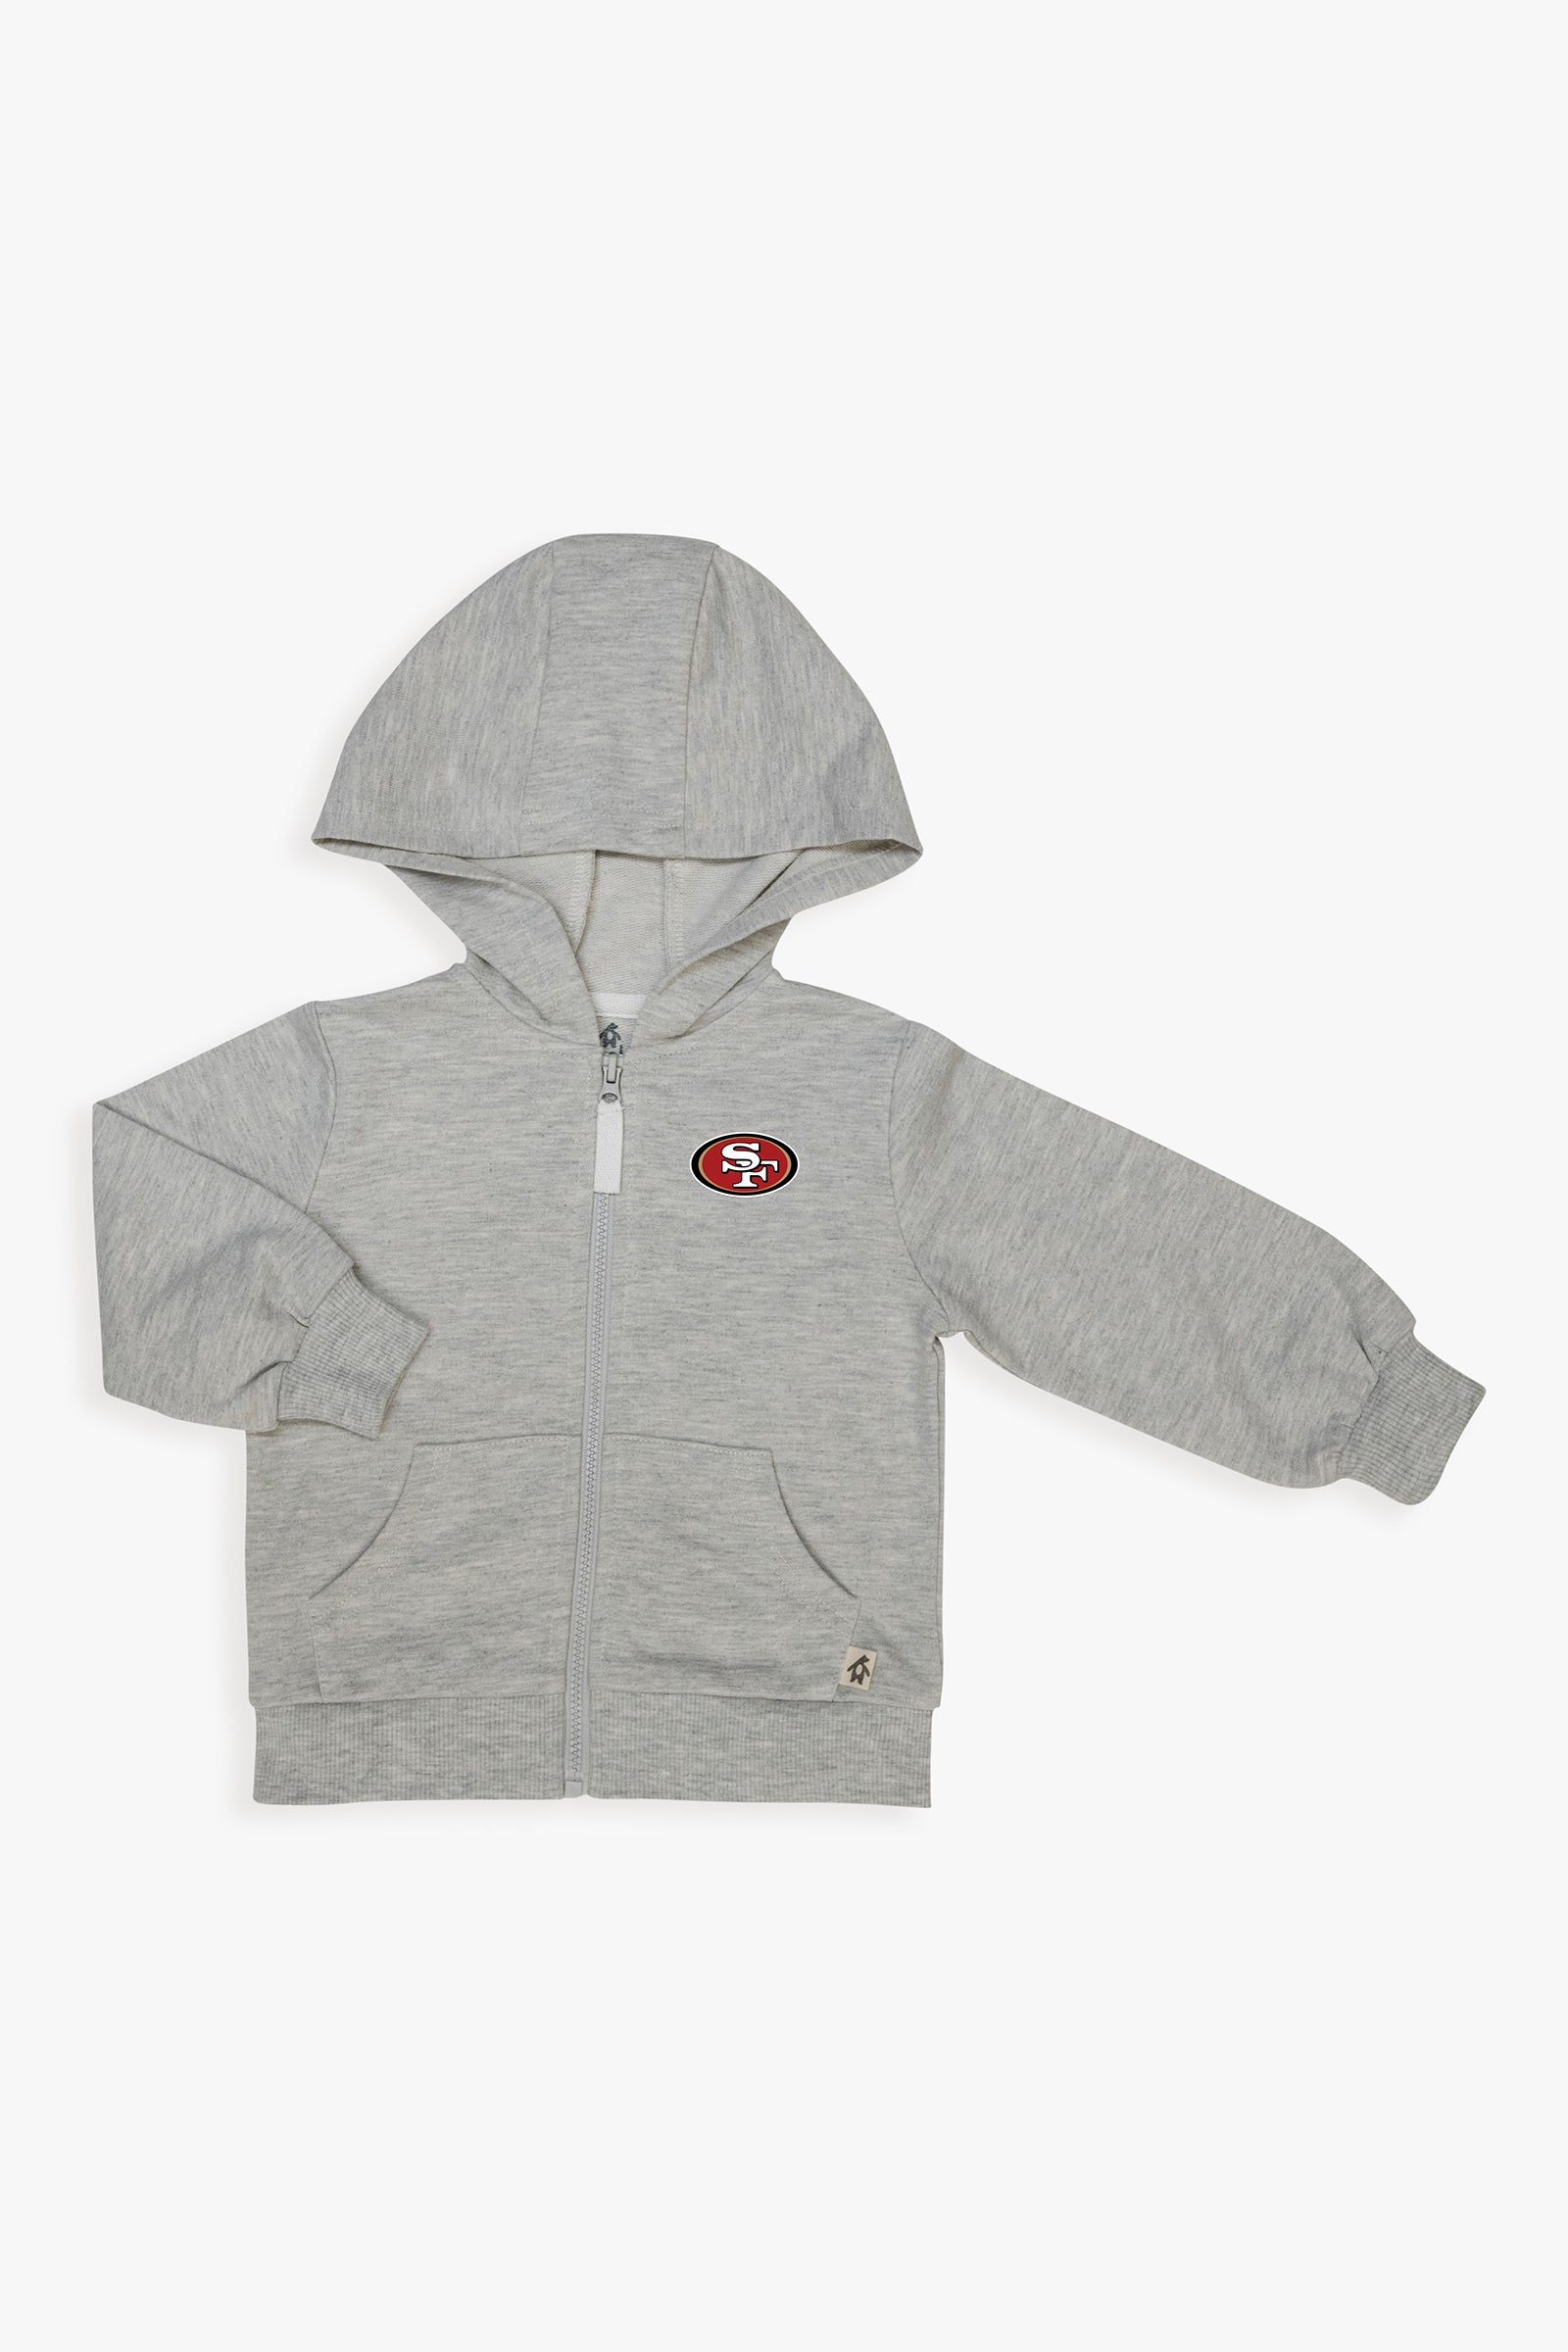 NFL Football Team Logo Baby Toddler Unisex Grey French Terry Zip-Up Hoodie